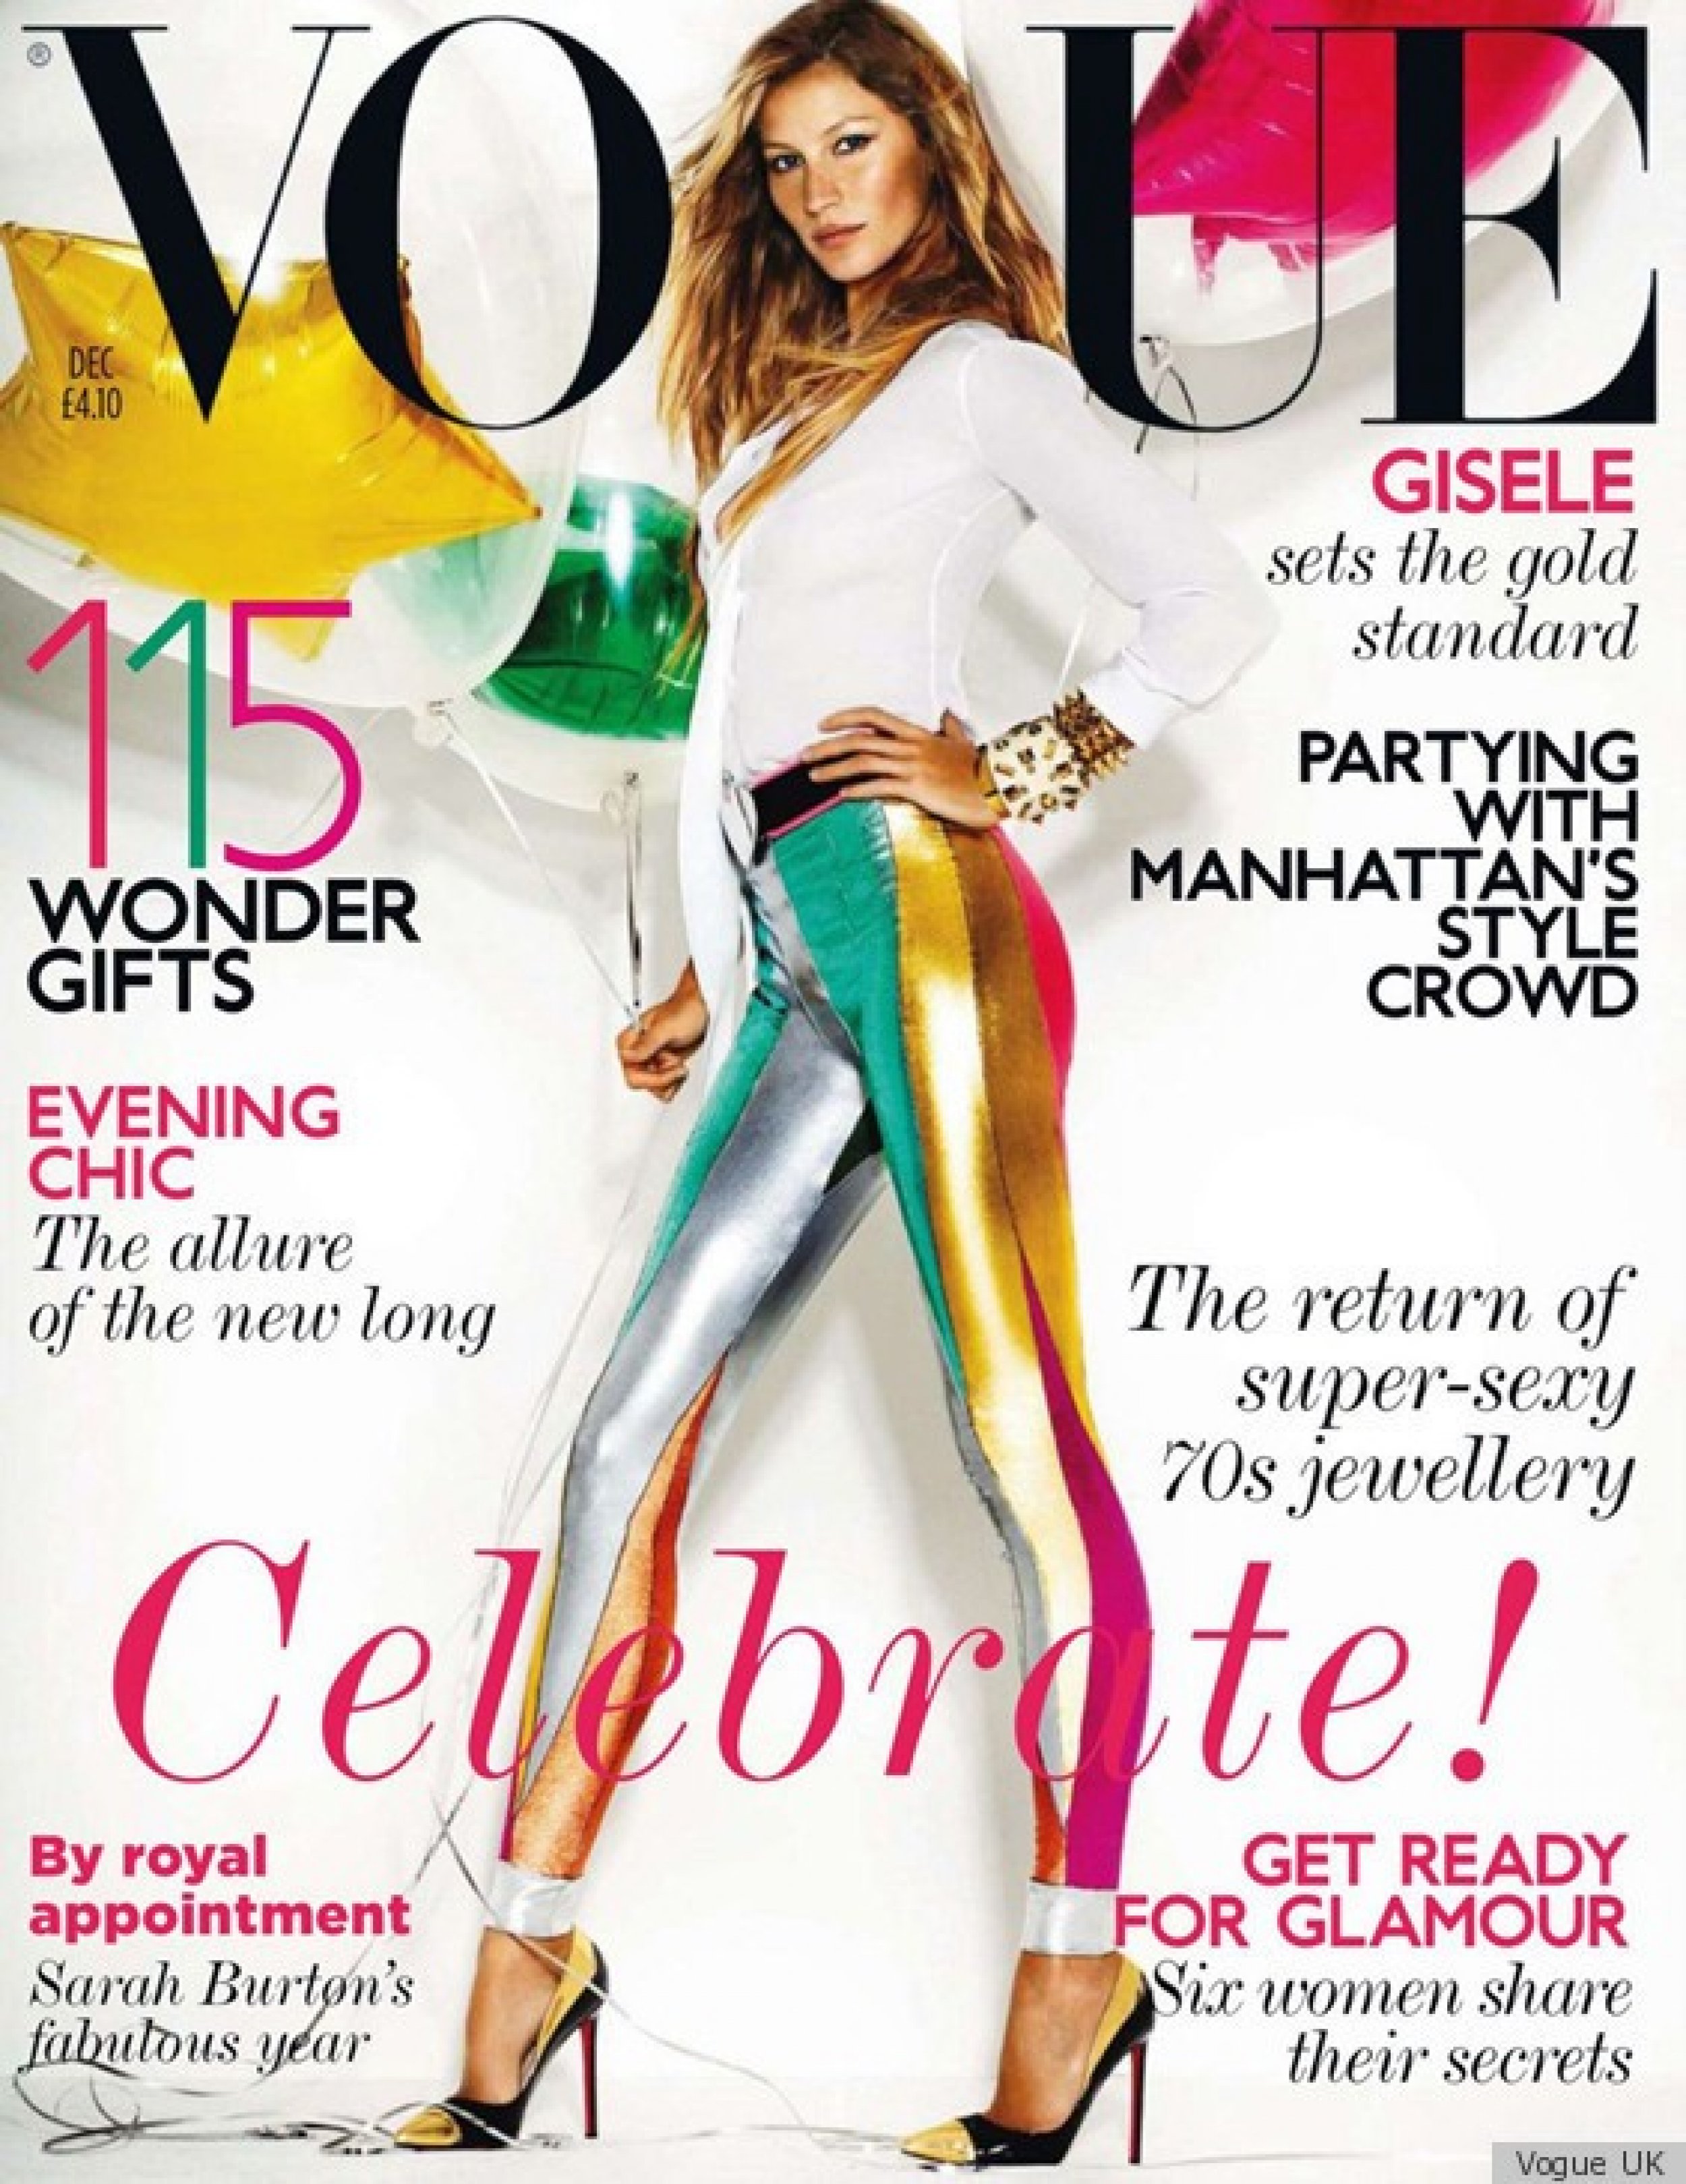 Gisele is Vogue's December Cover Girl | IBTimes